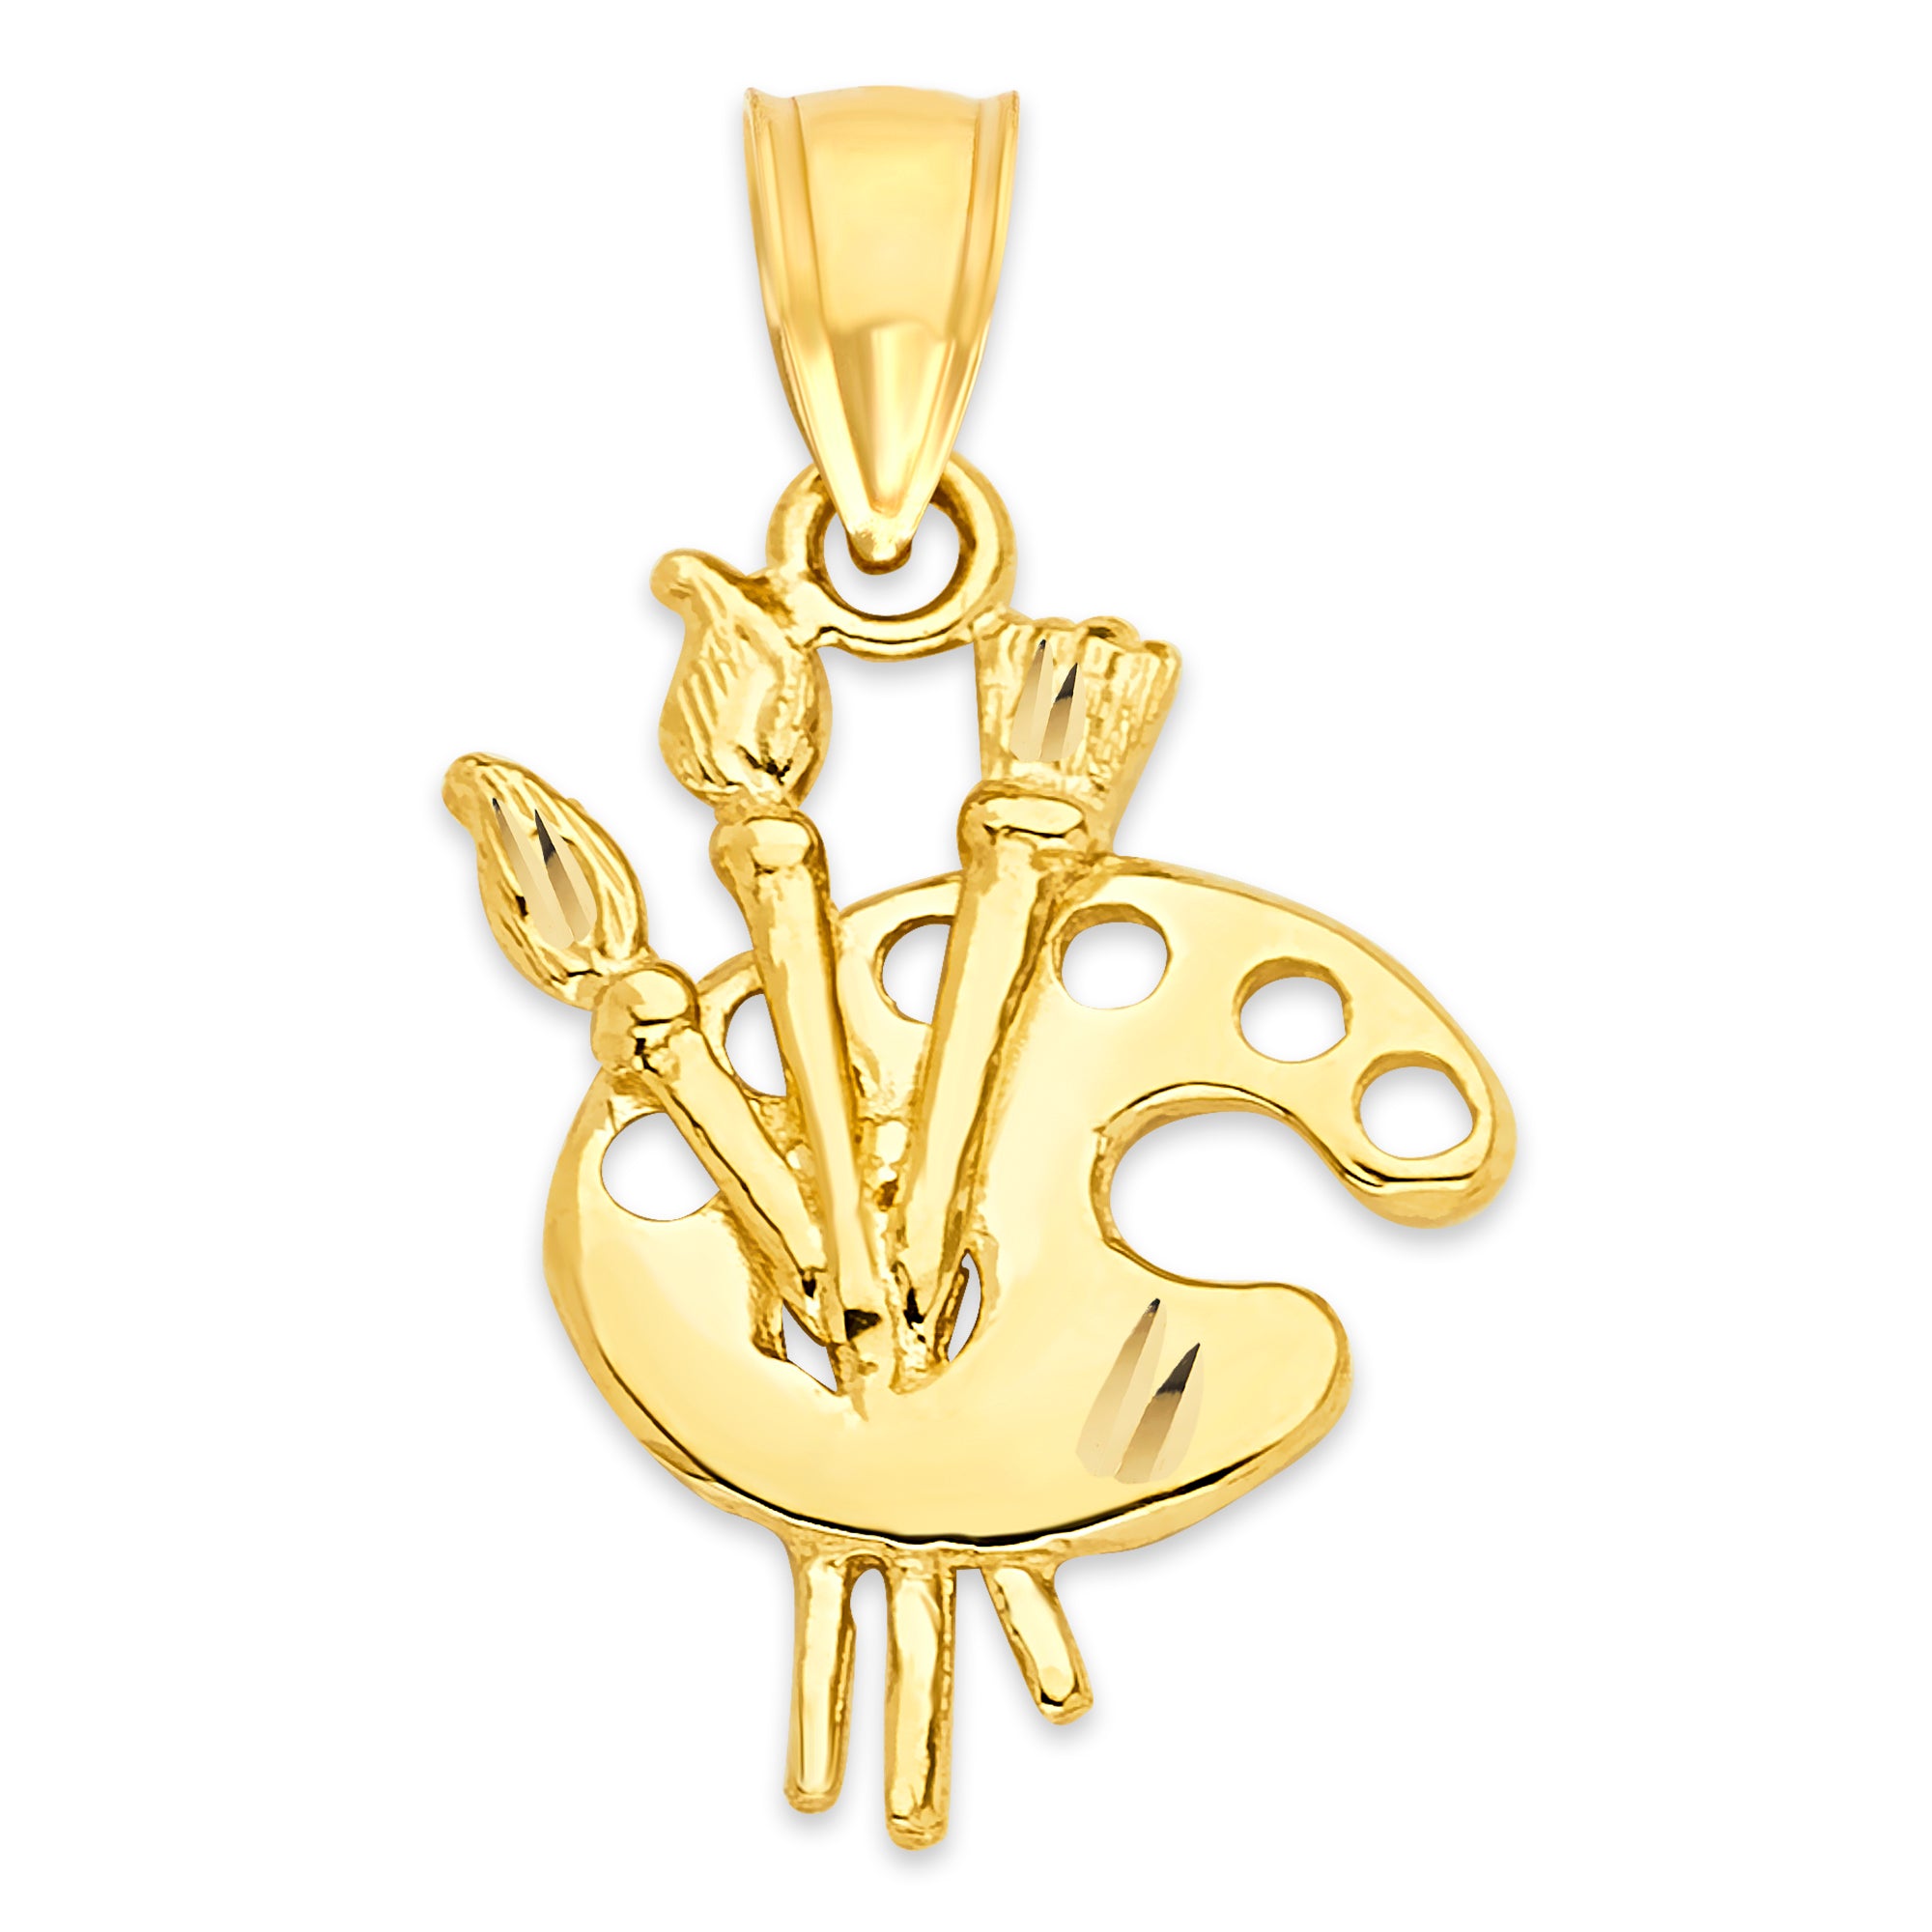 Solid Gold Painter Pendant - 10k or 14k